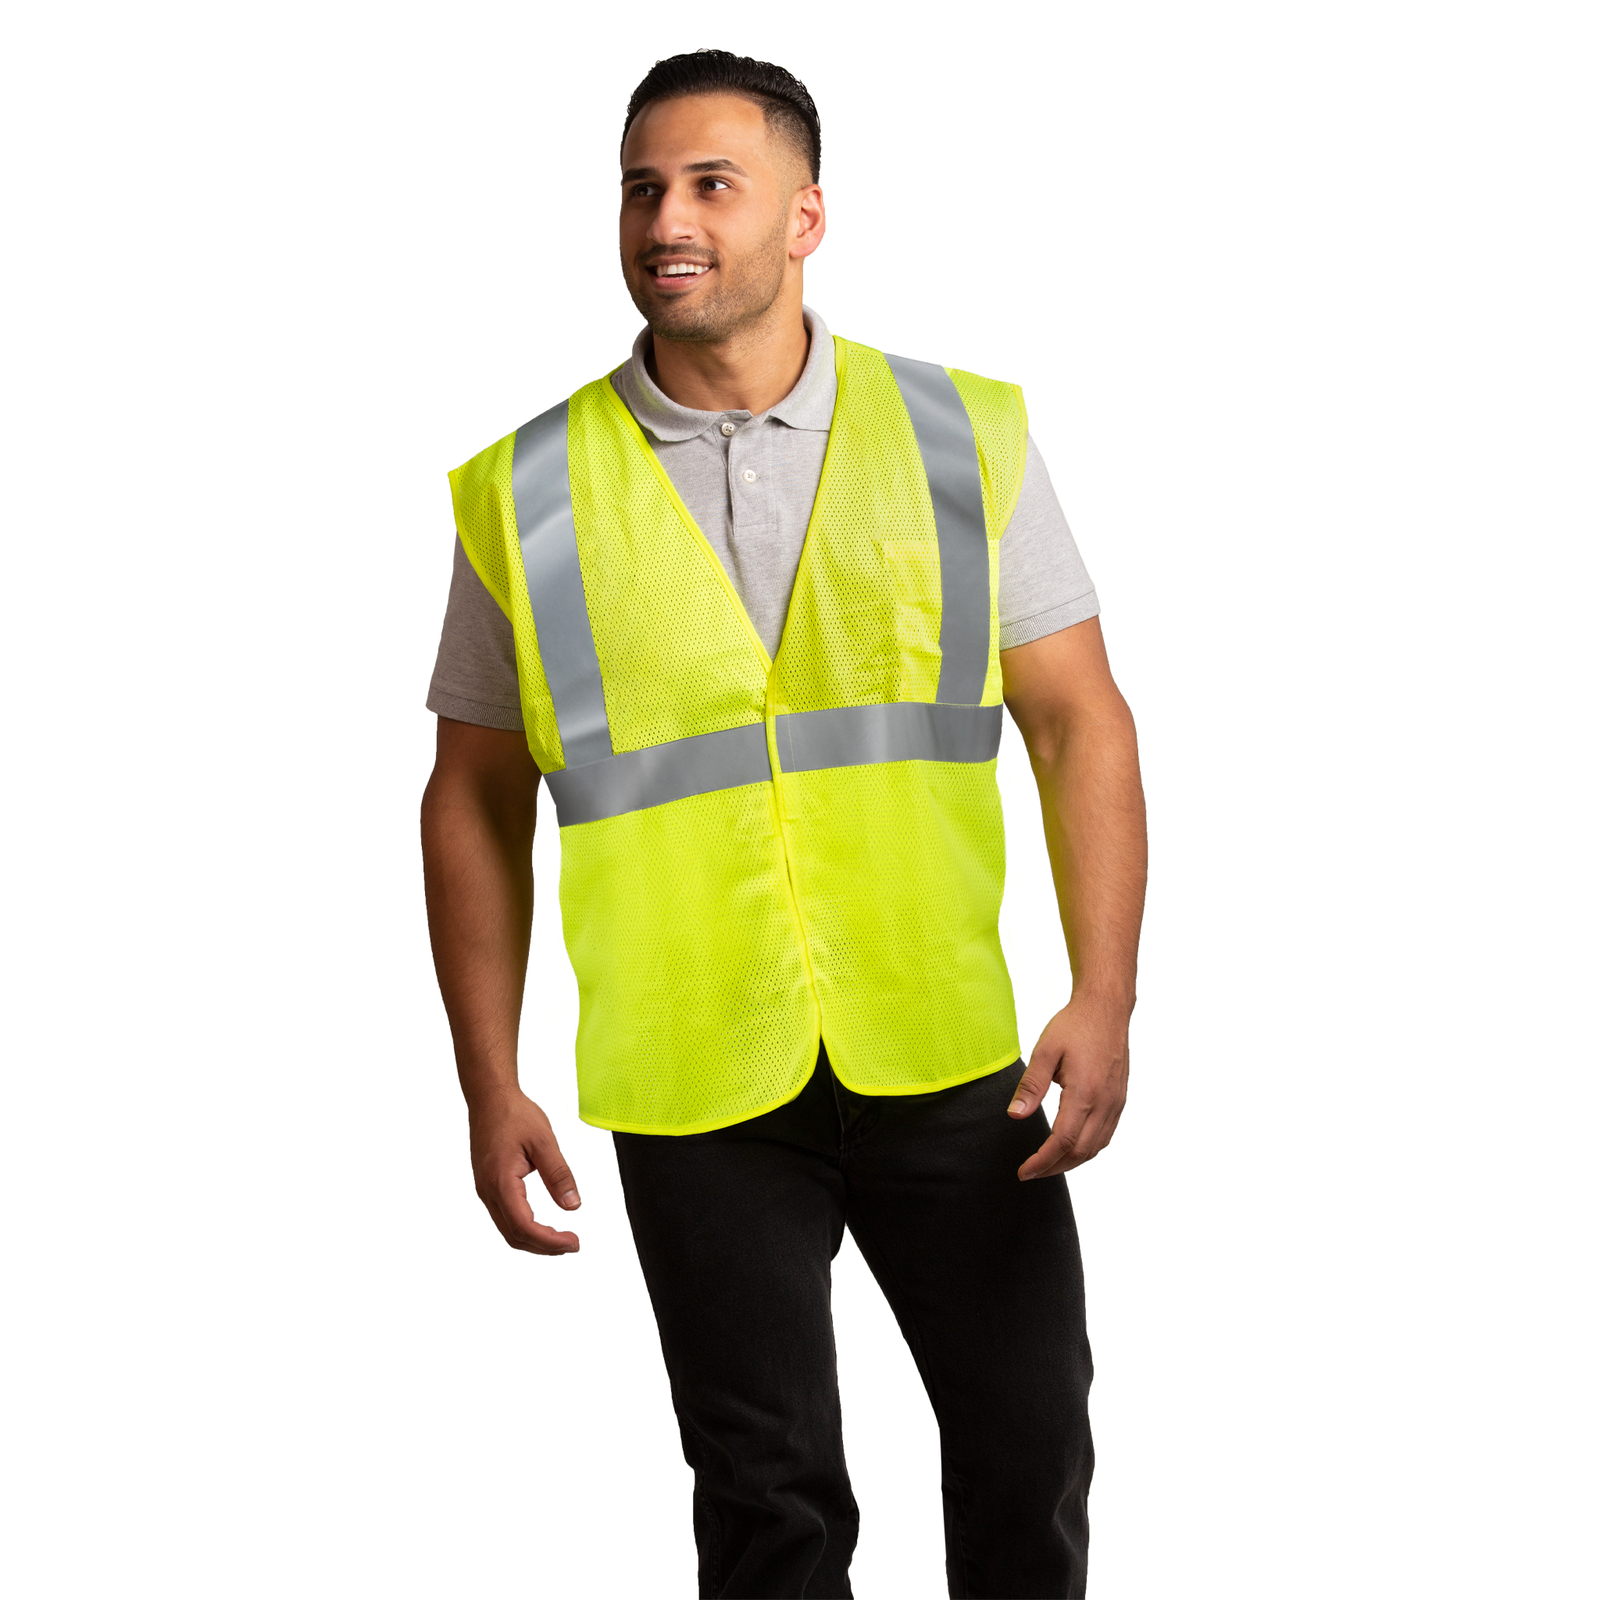 Man wearing the ANSI/ISEA 107-2015, Type R Class 2 lime safety vest 